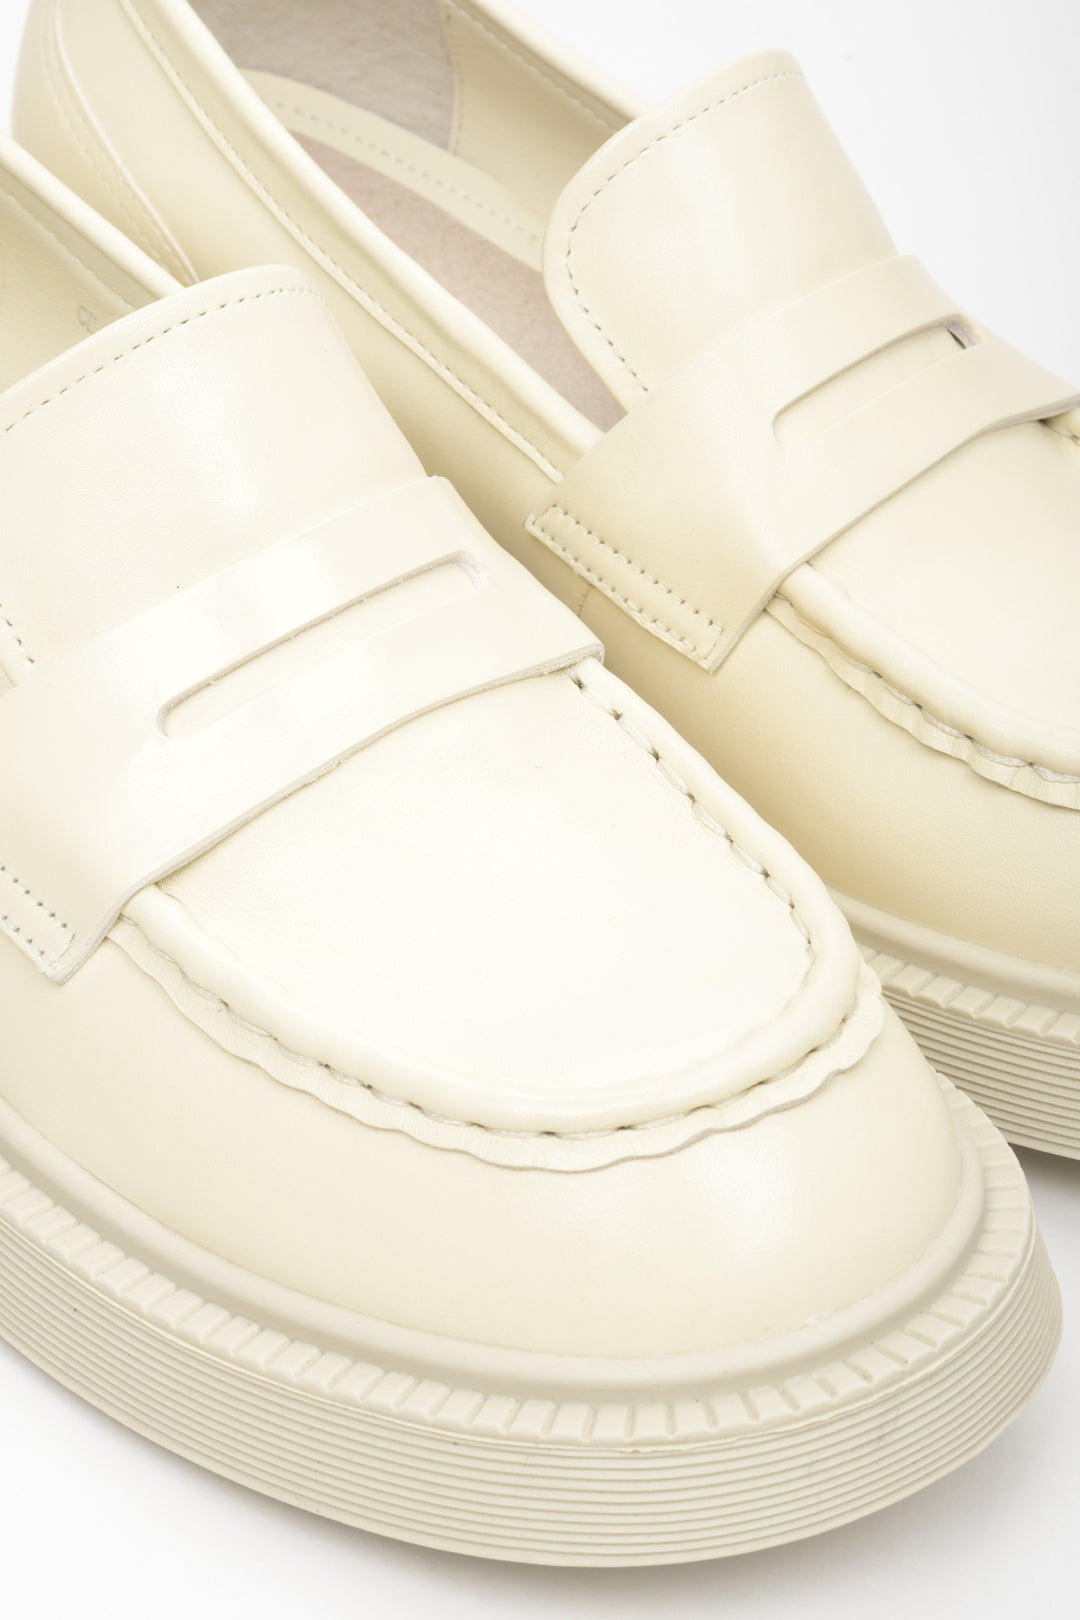 Women's moccasins made of genuine leather in light beige by Estro